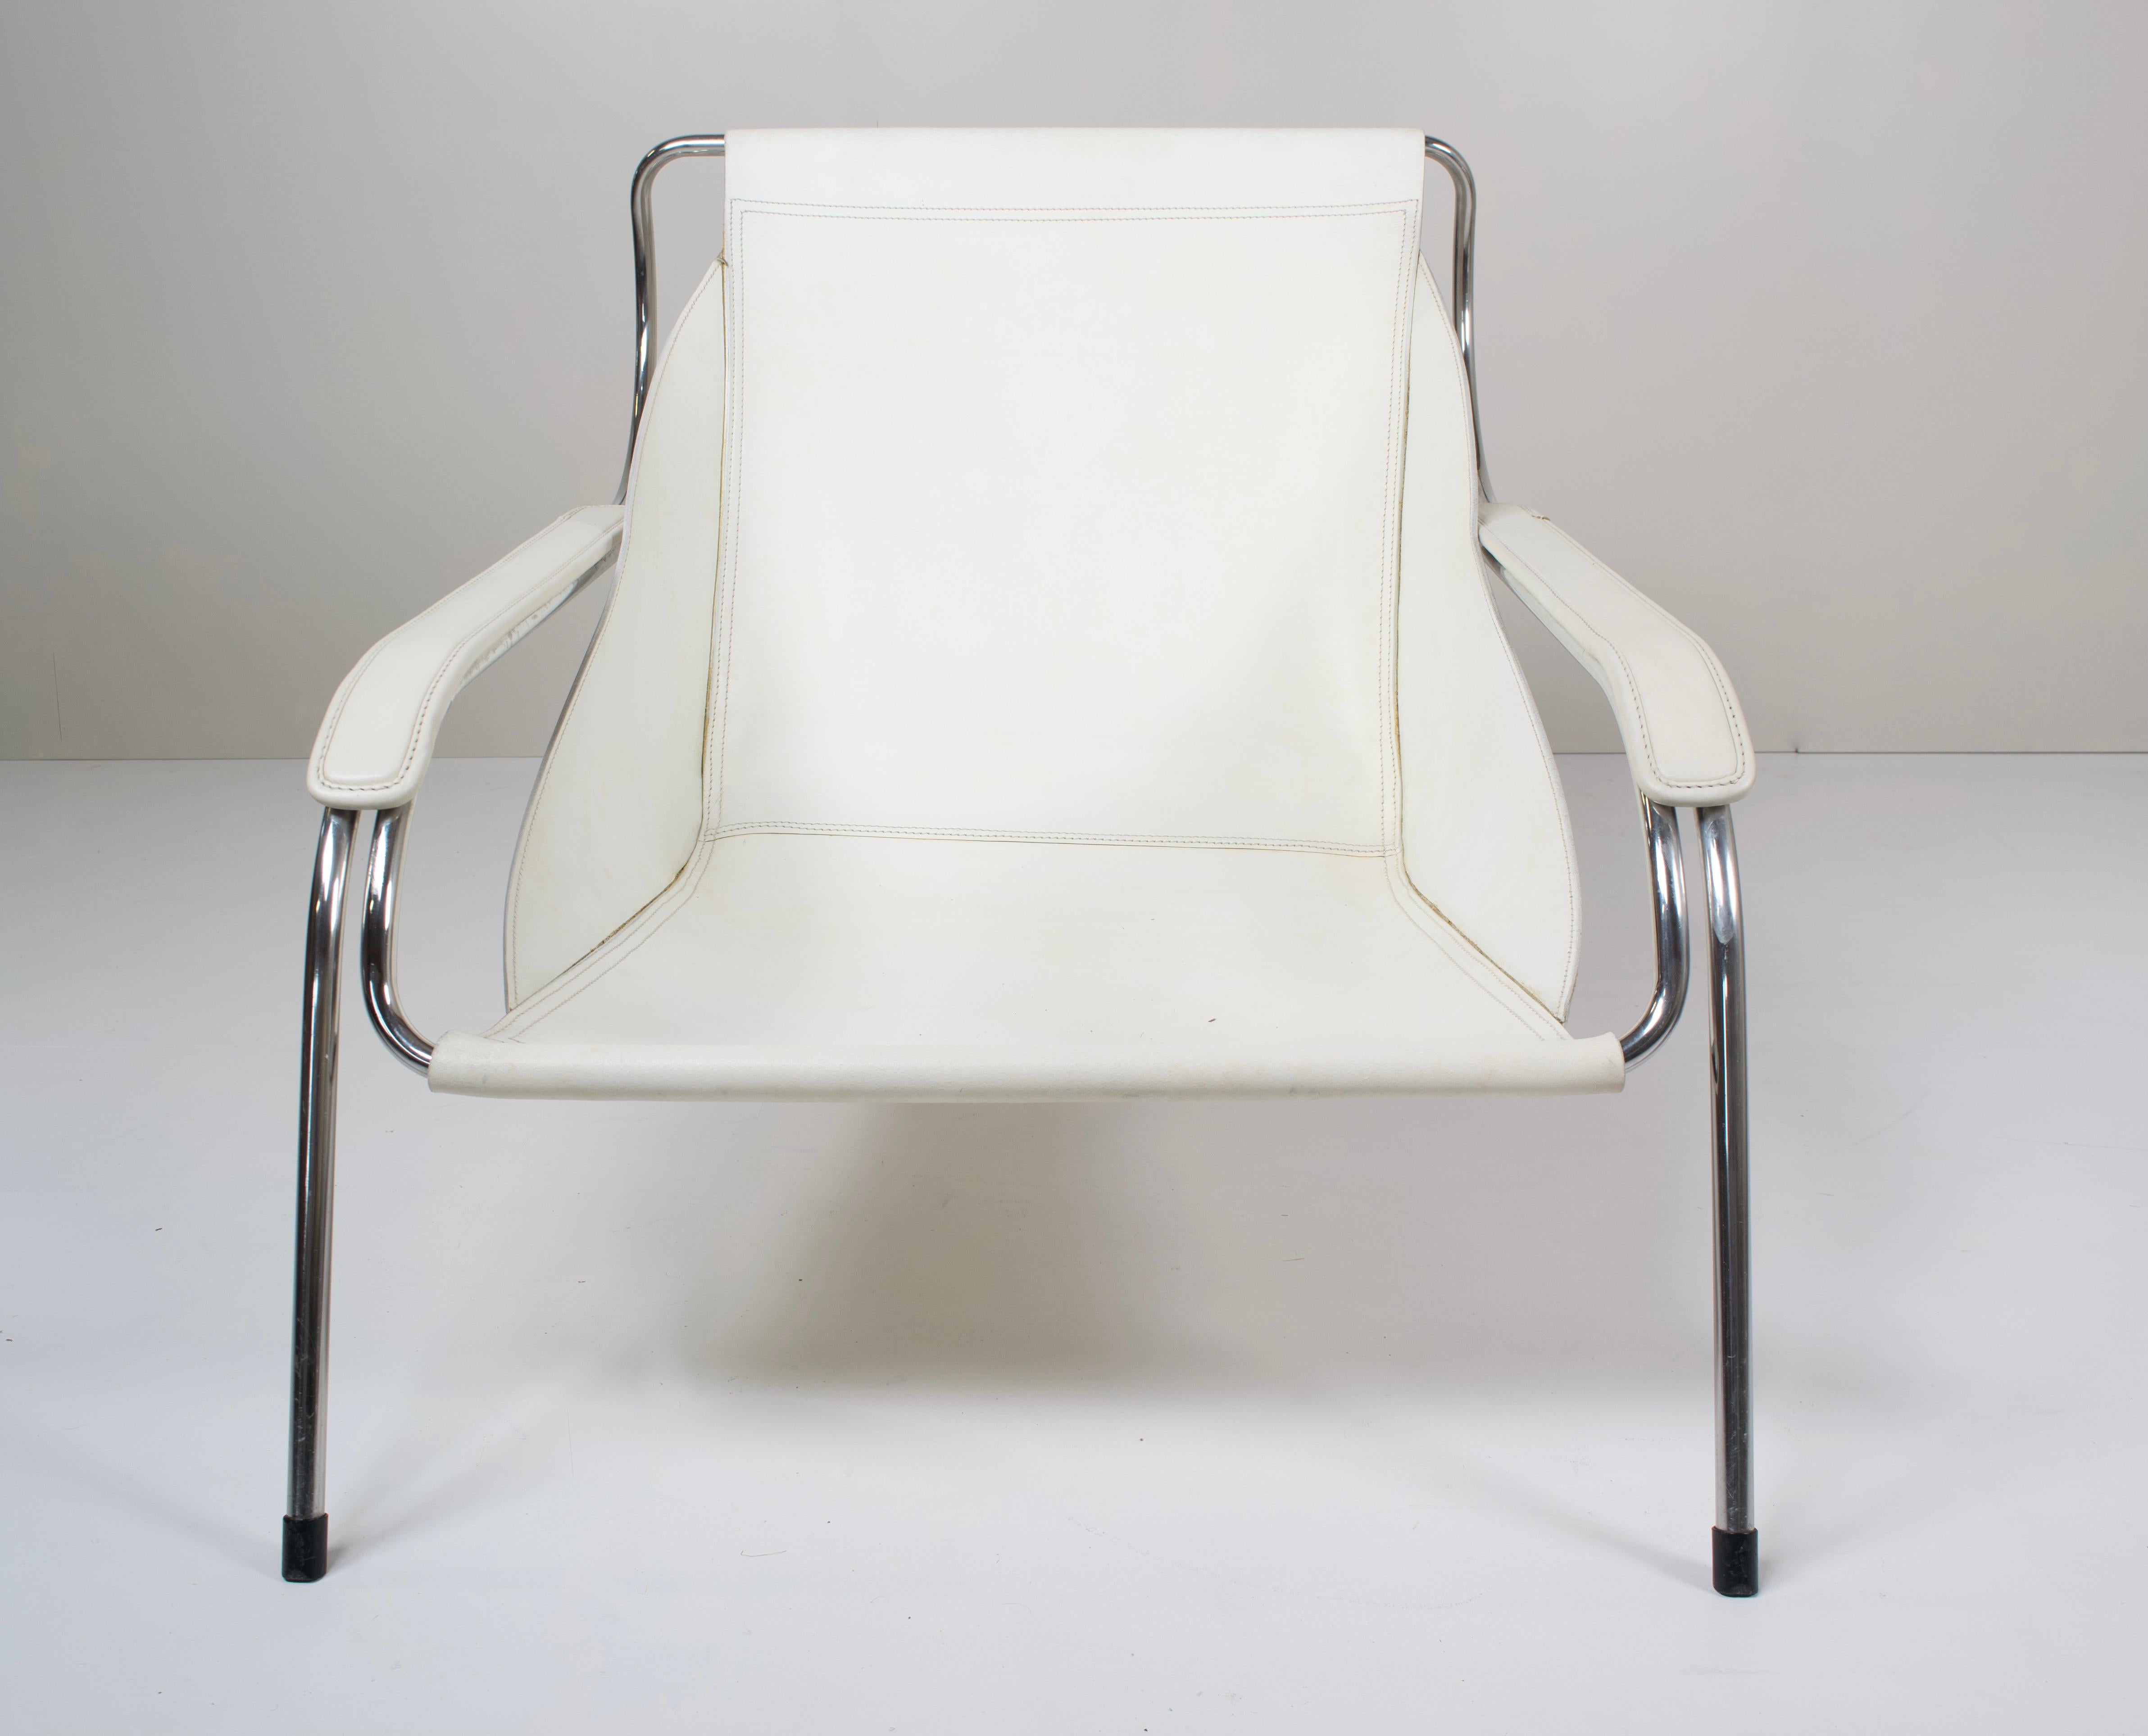 Pair of Marco Zanuso Maggiolina White Leather Chairs by Zanotta, Italy, 1947 5